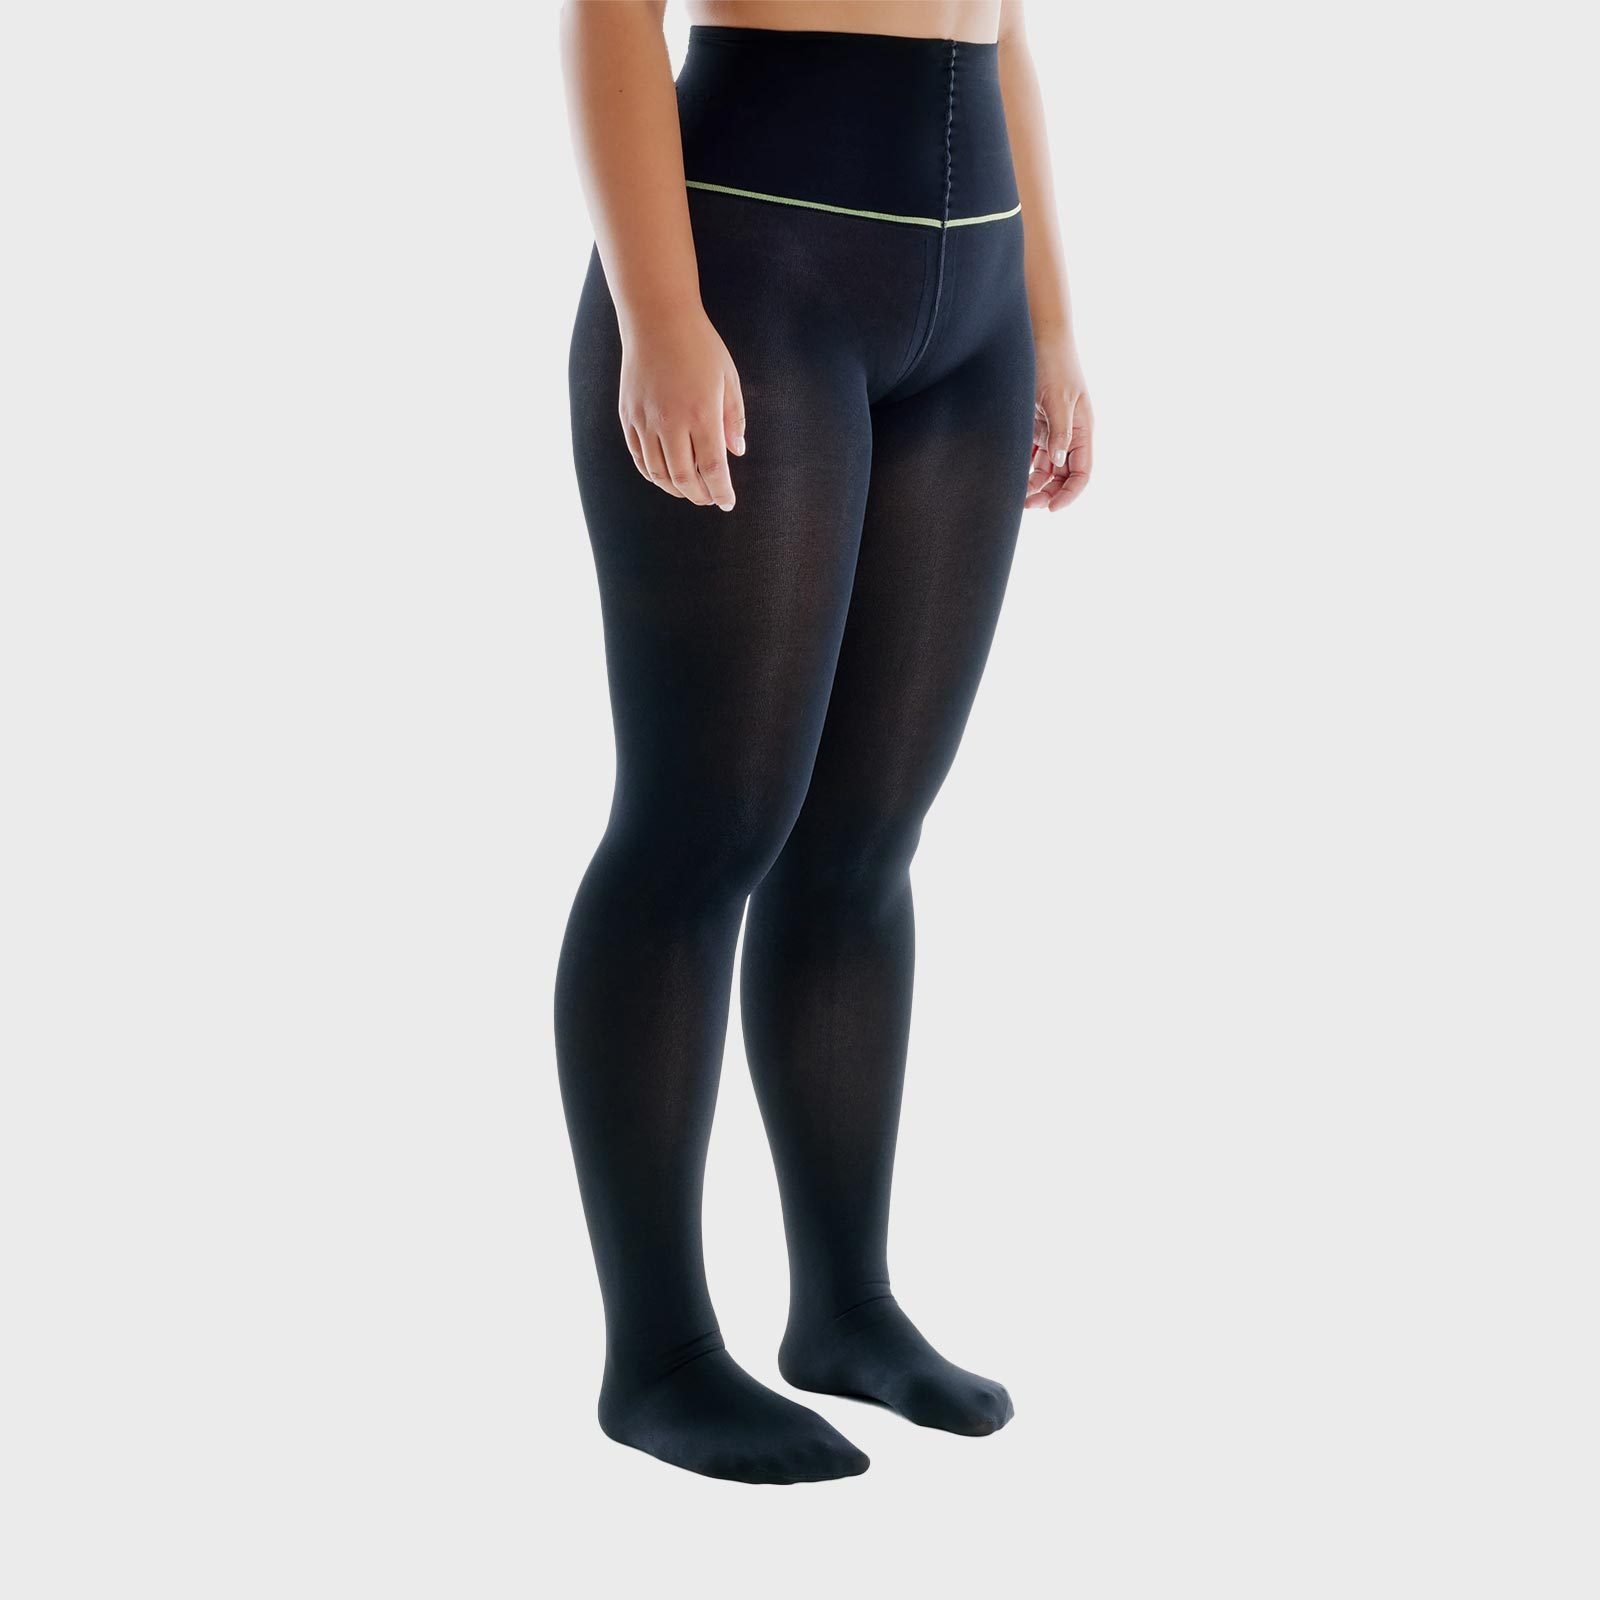 Sheertex Tights Are Nearly Indistructible—And Our Editors Love Them